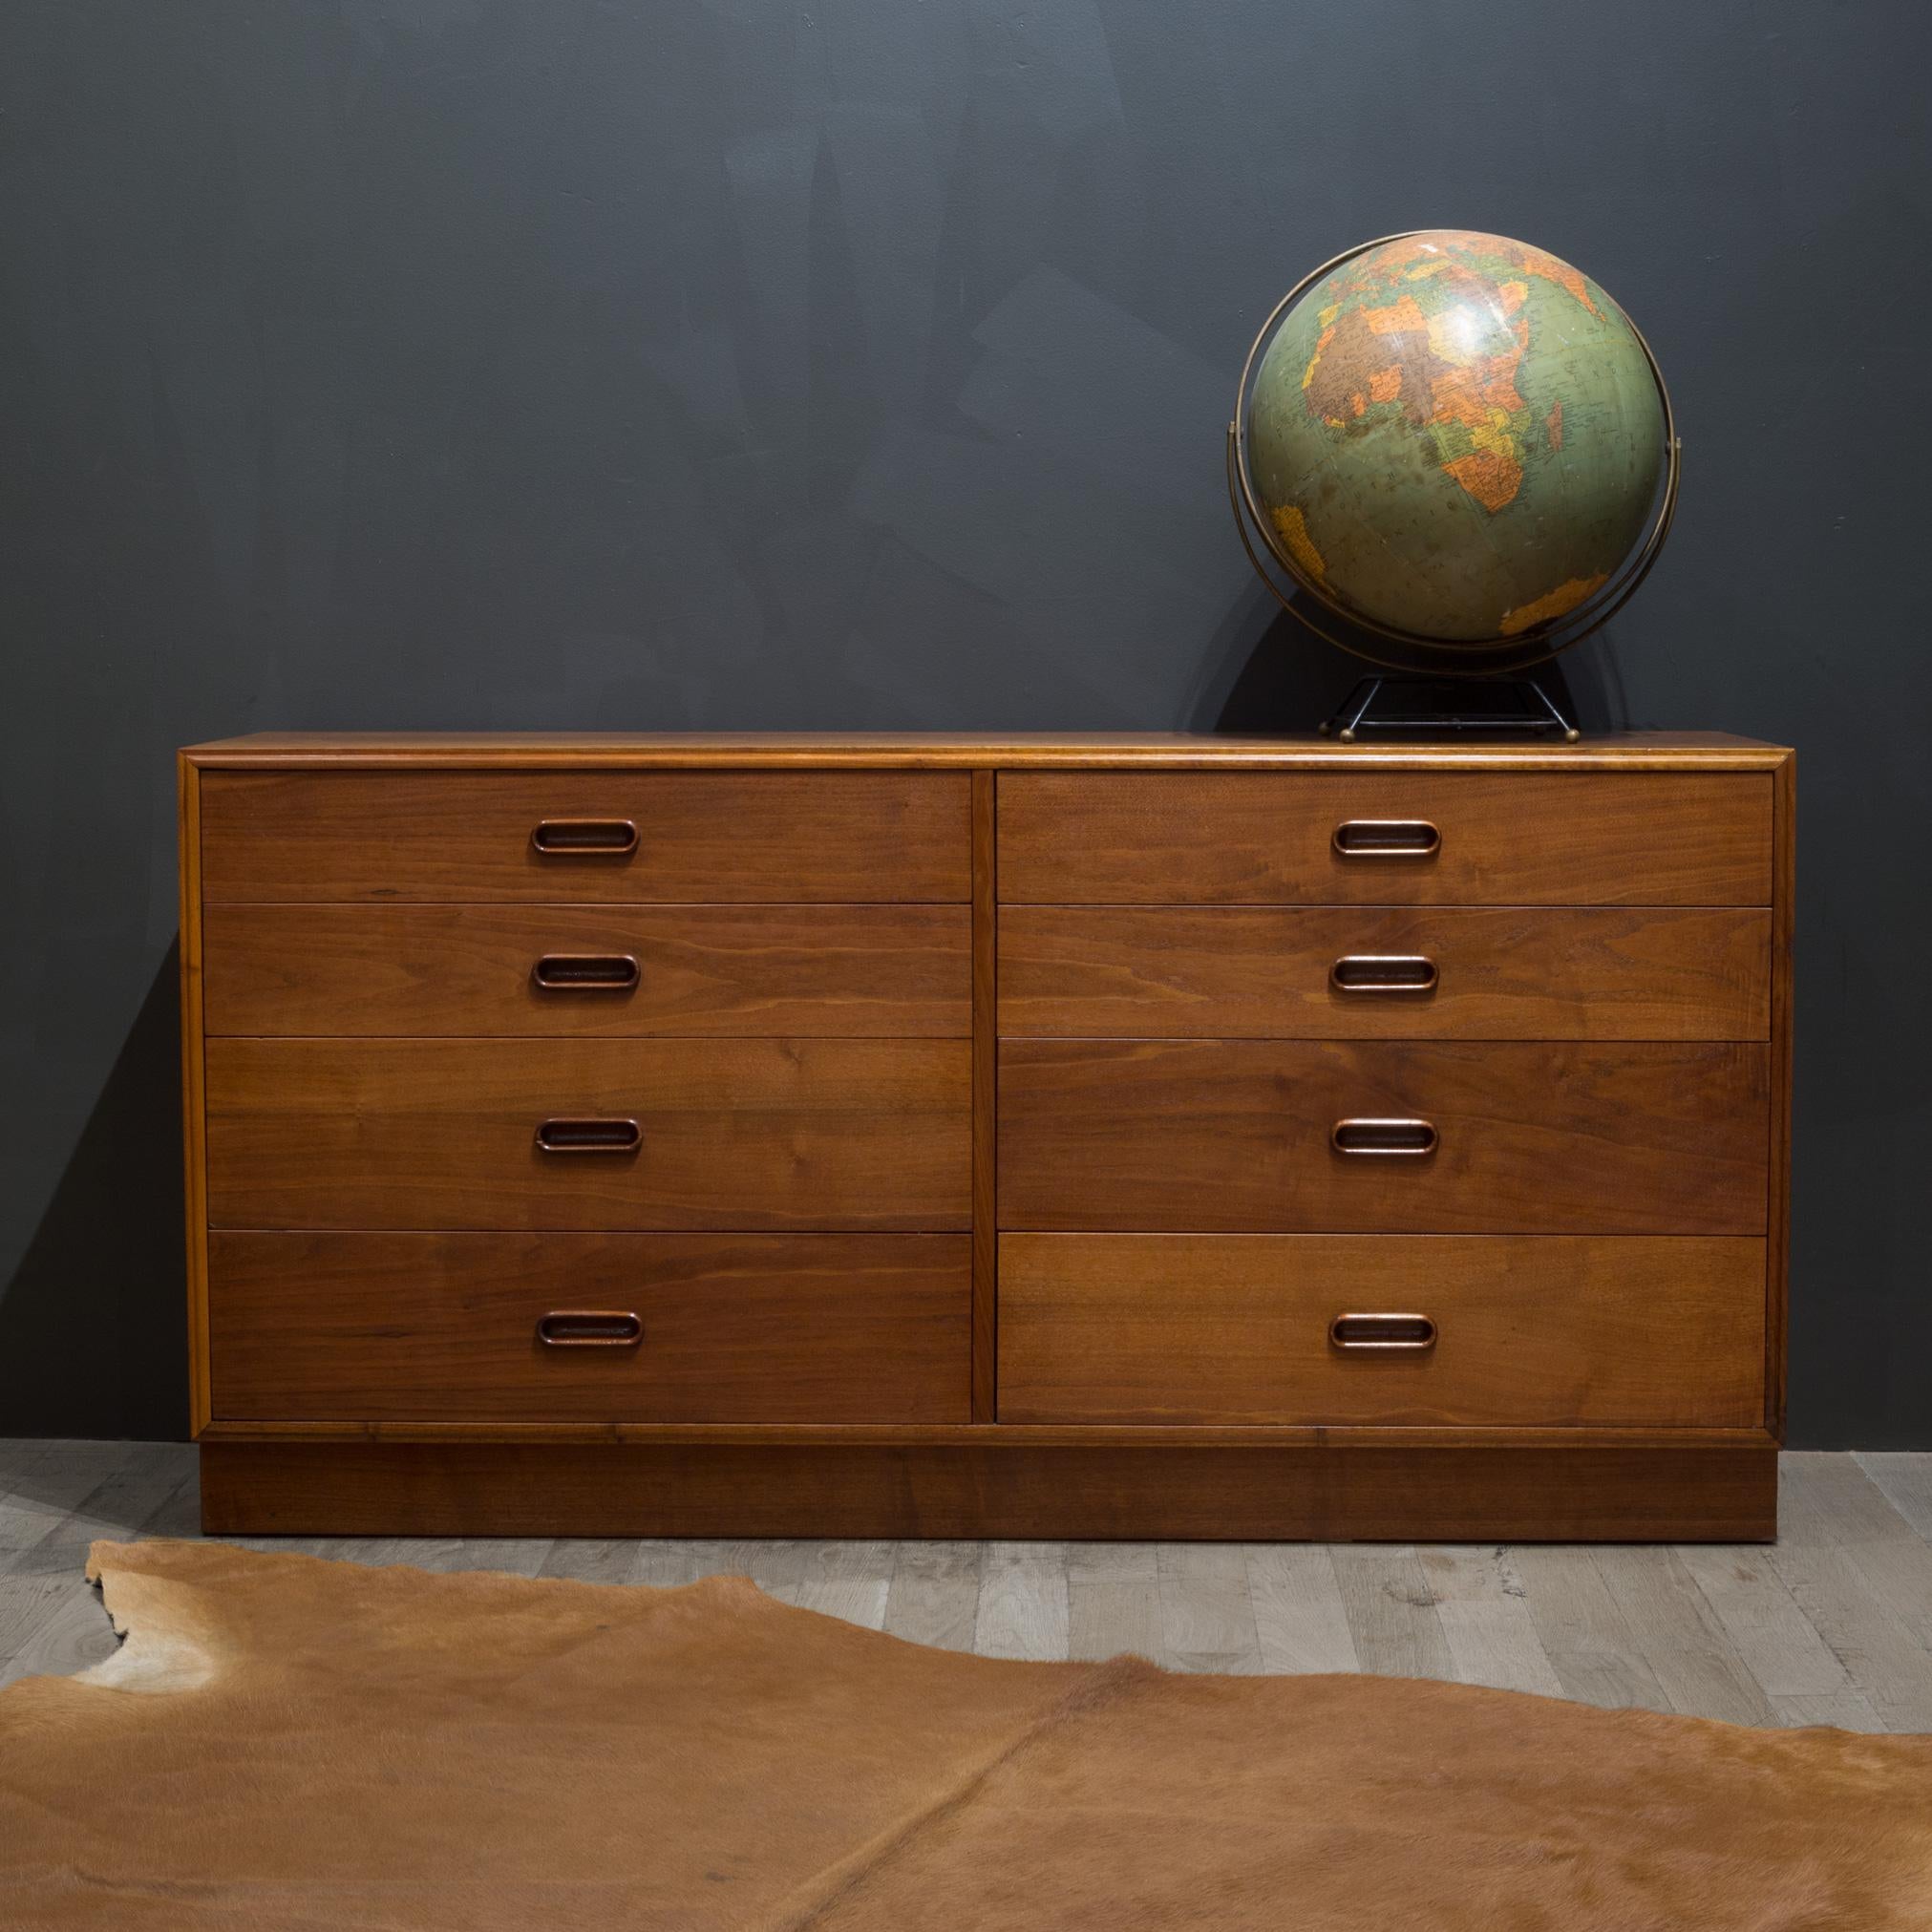 About

A Walnut credenza with elegant details and timeless simplicity. The European walnut veneer is in good original condition with two black 1